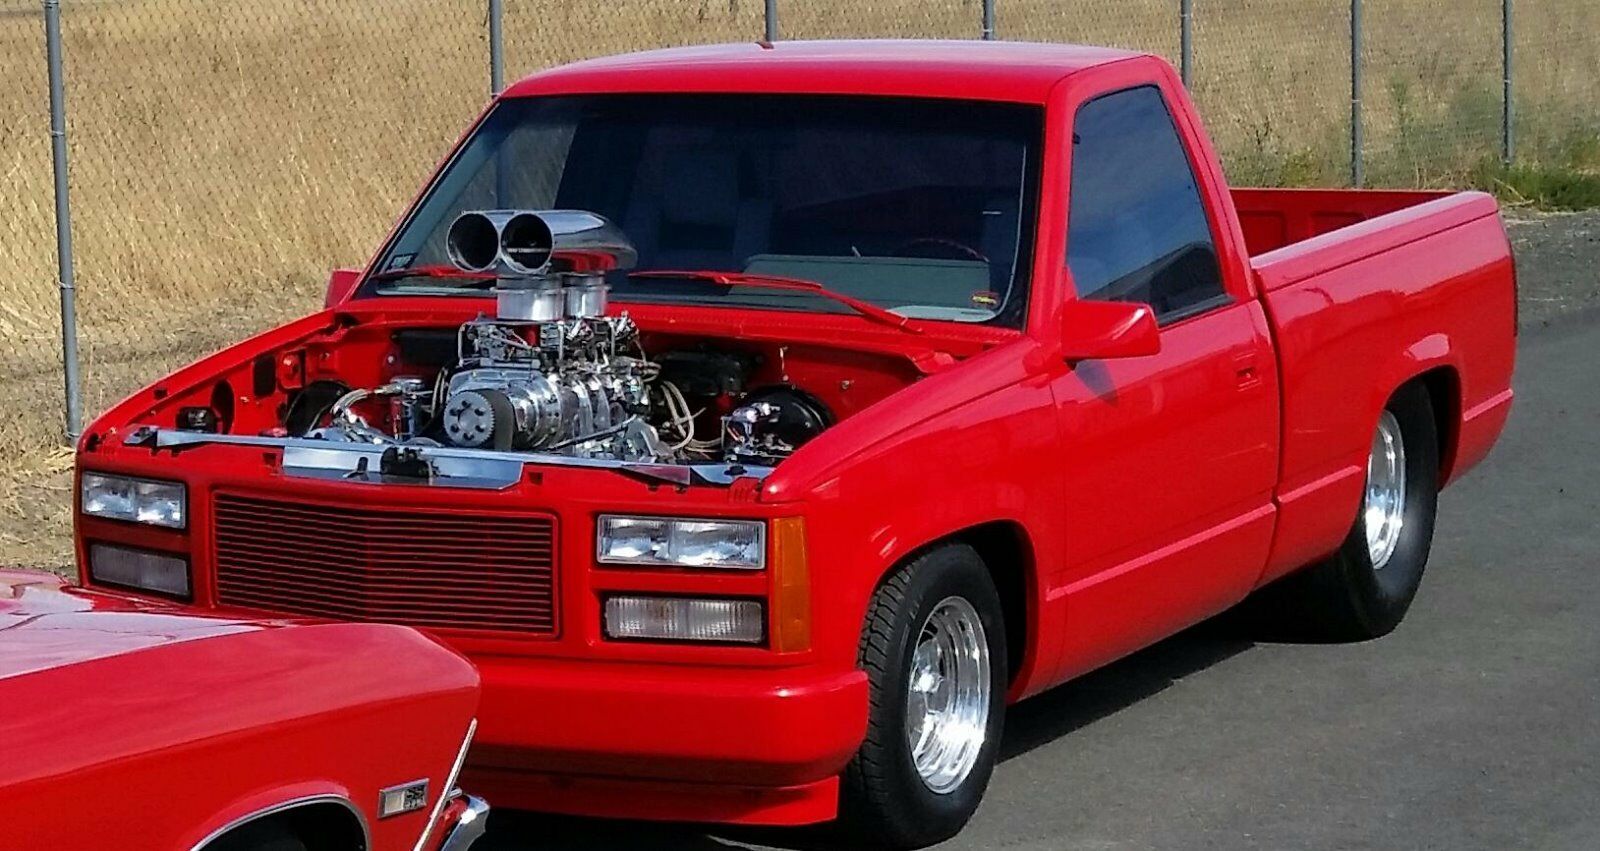 Sport Truck Meets Pro Street: This 1989 Chevrolet C-1500 Is Two Eras In One